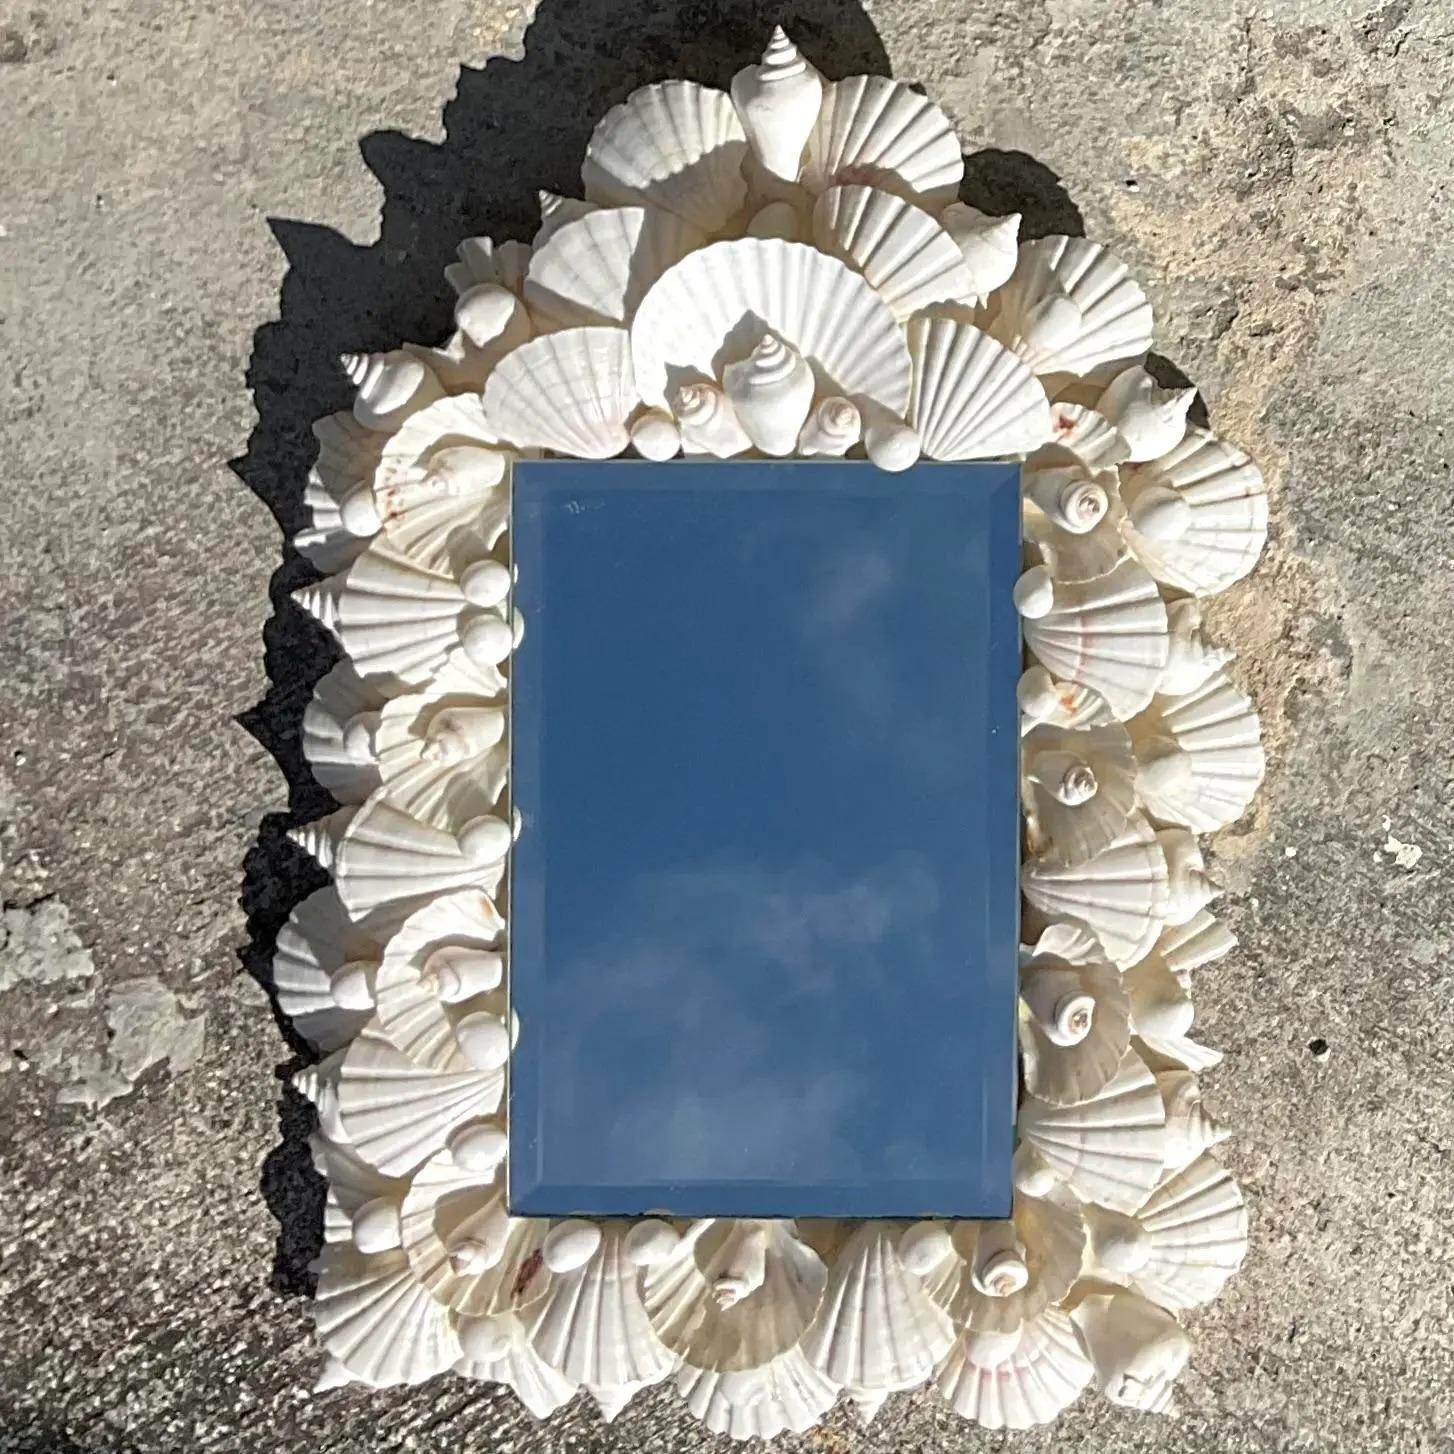 A fabulous vintage Coastal wall mirror. A classic handmade shell design in beautiful tonal shells. Acquired from a Palm Beach estate.